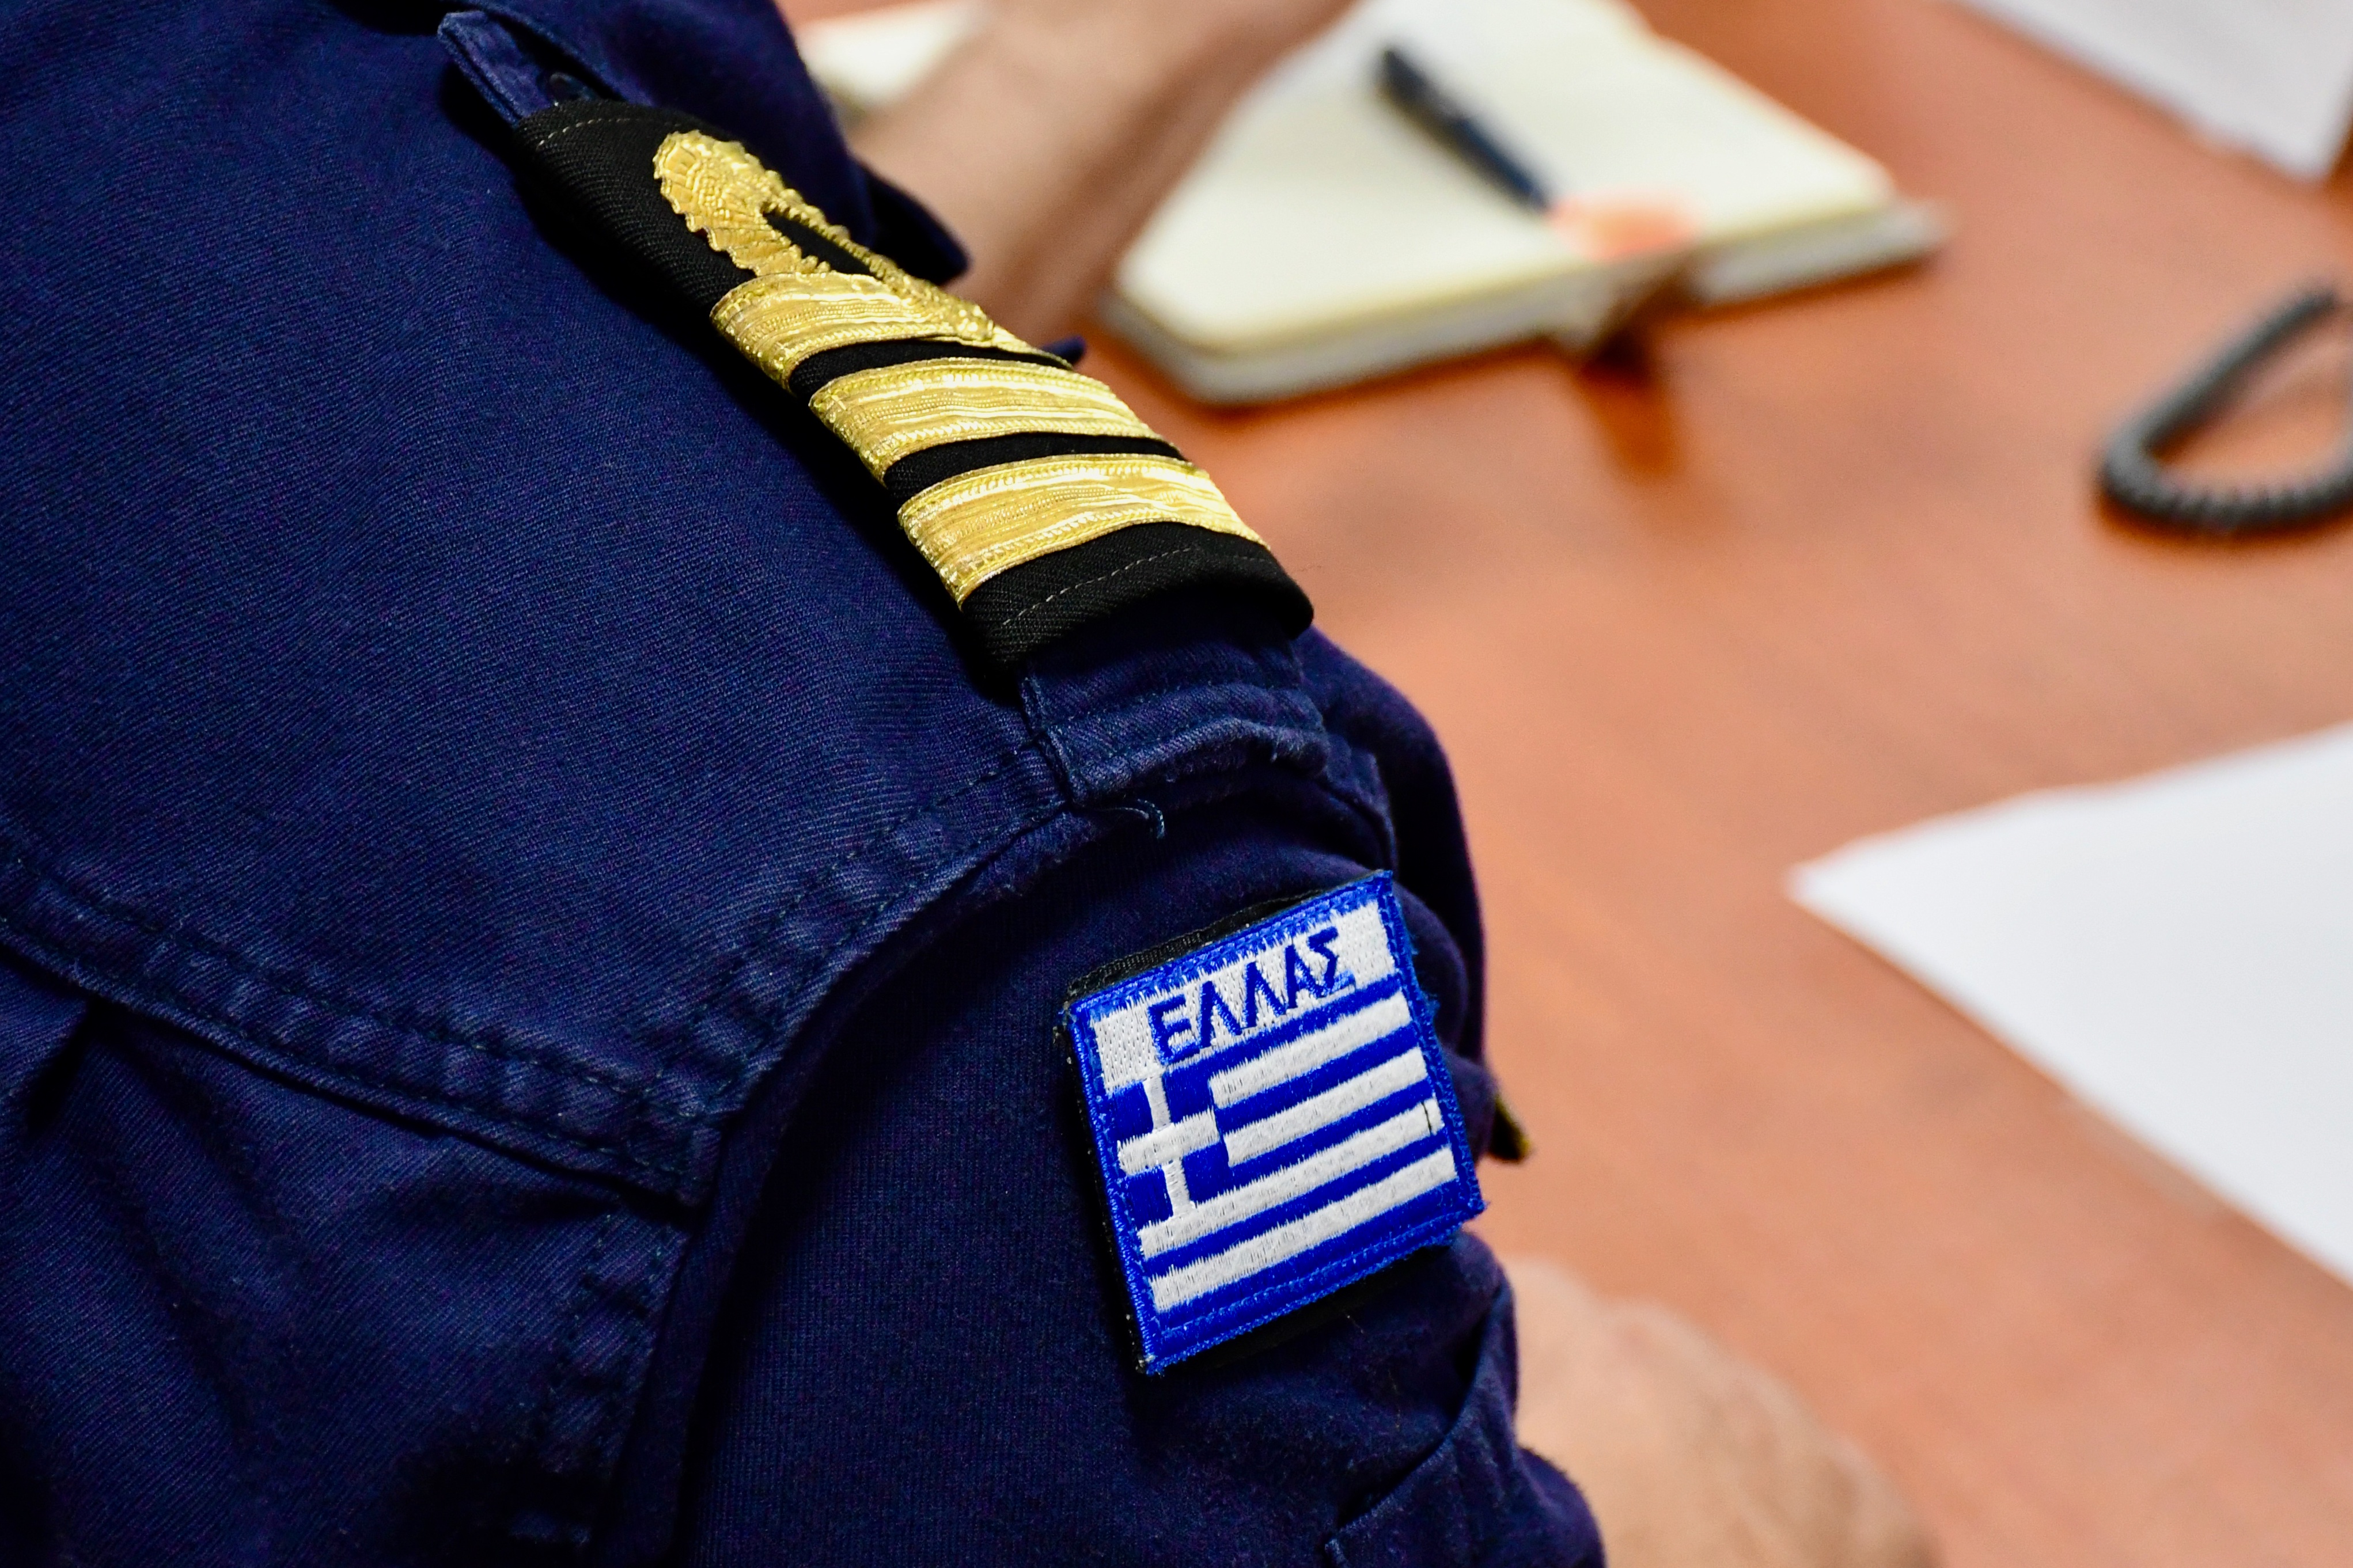 "Hellas" the Greek national flag and symbol of the Hellenic Navy on the uniform.